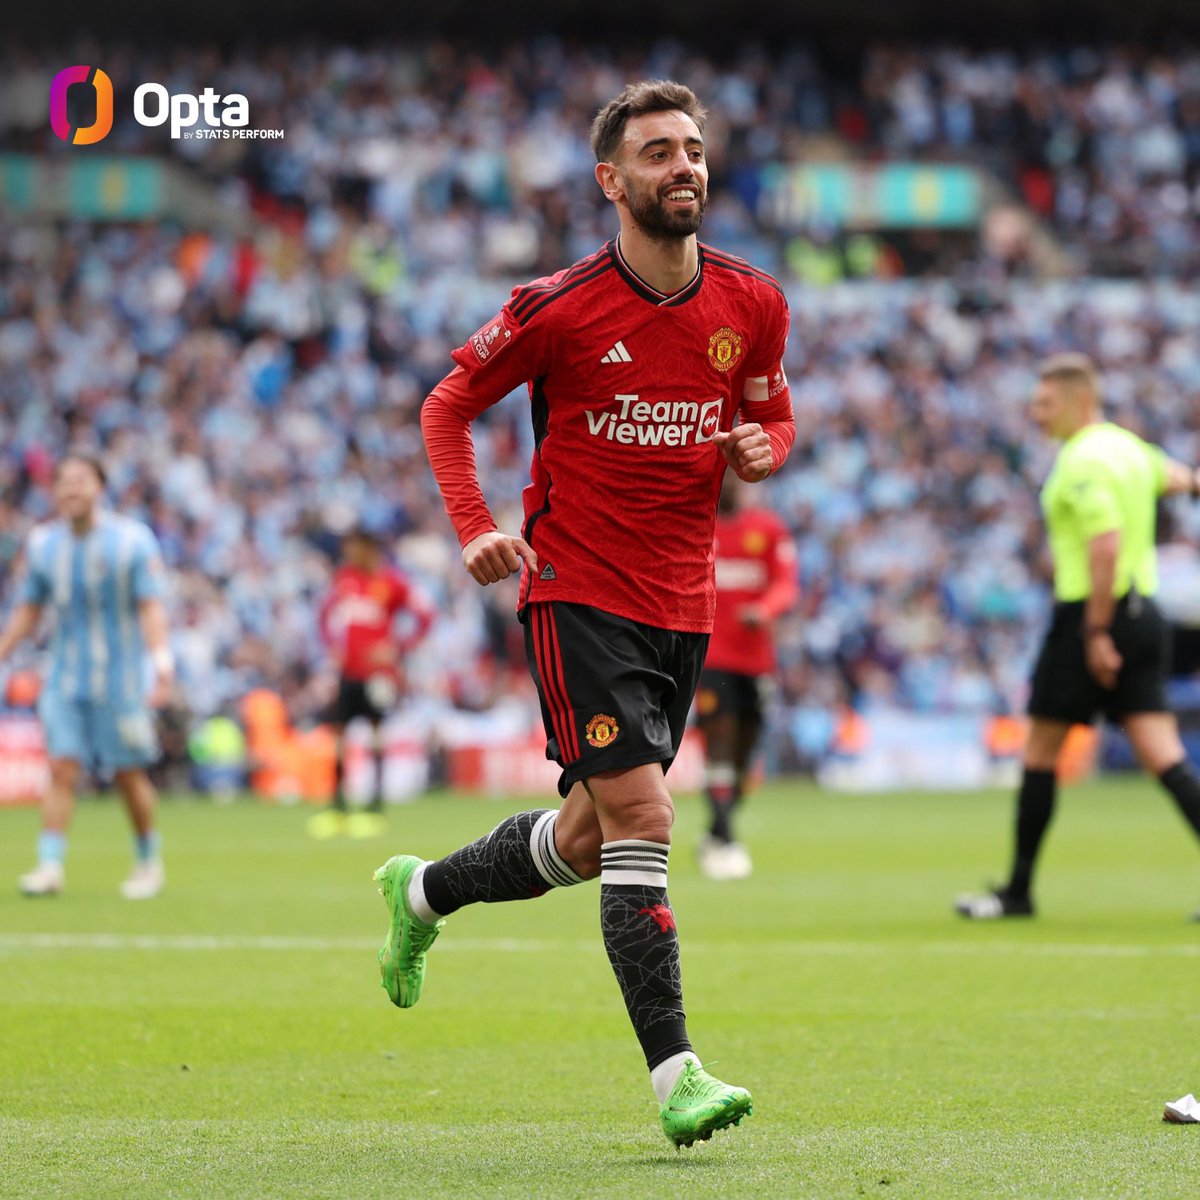 17 - Bruno Fernandes has scored and assisted in 17 matches for Manchester United - since his debut for the club in February 2020, the only Premier League player to do so in more different games in all competitions is Mohamed Salah (20). Catalyst.